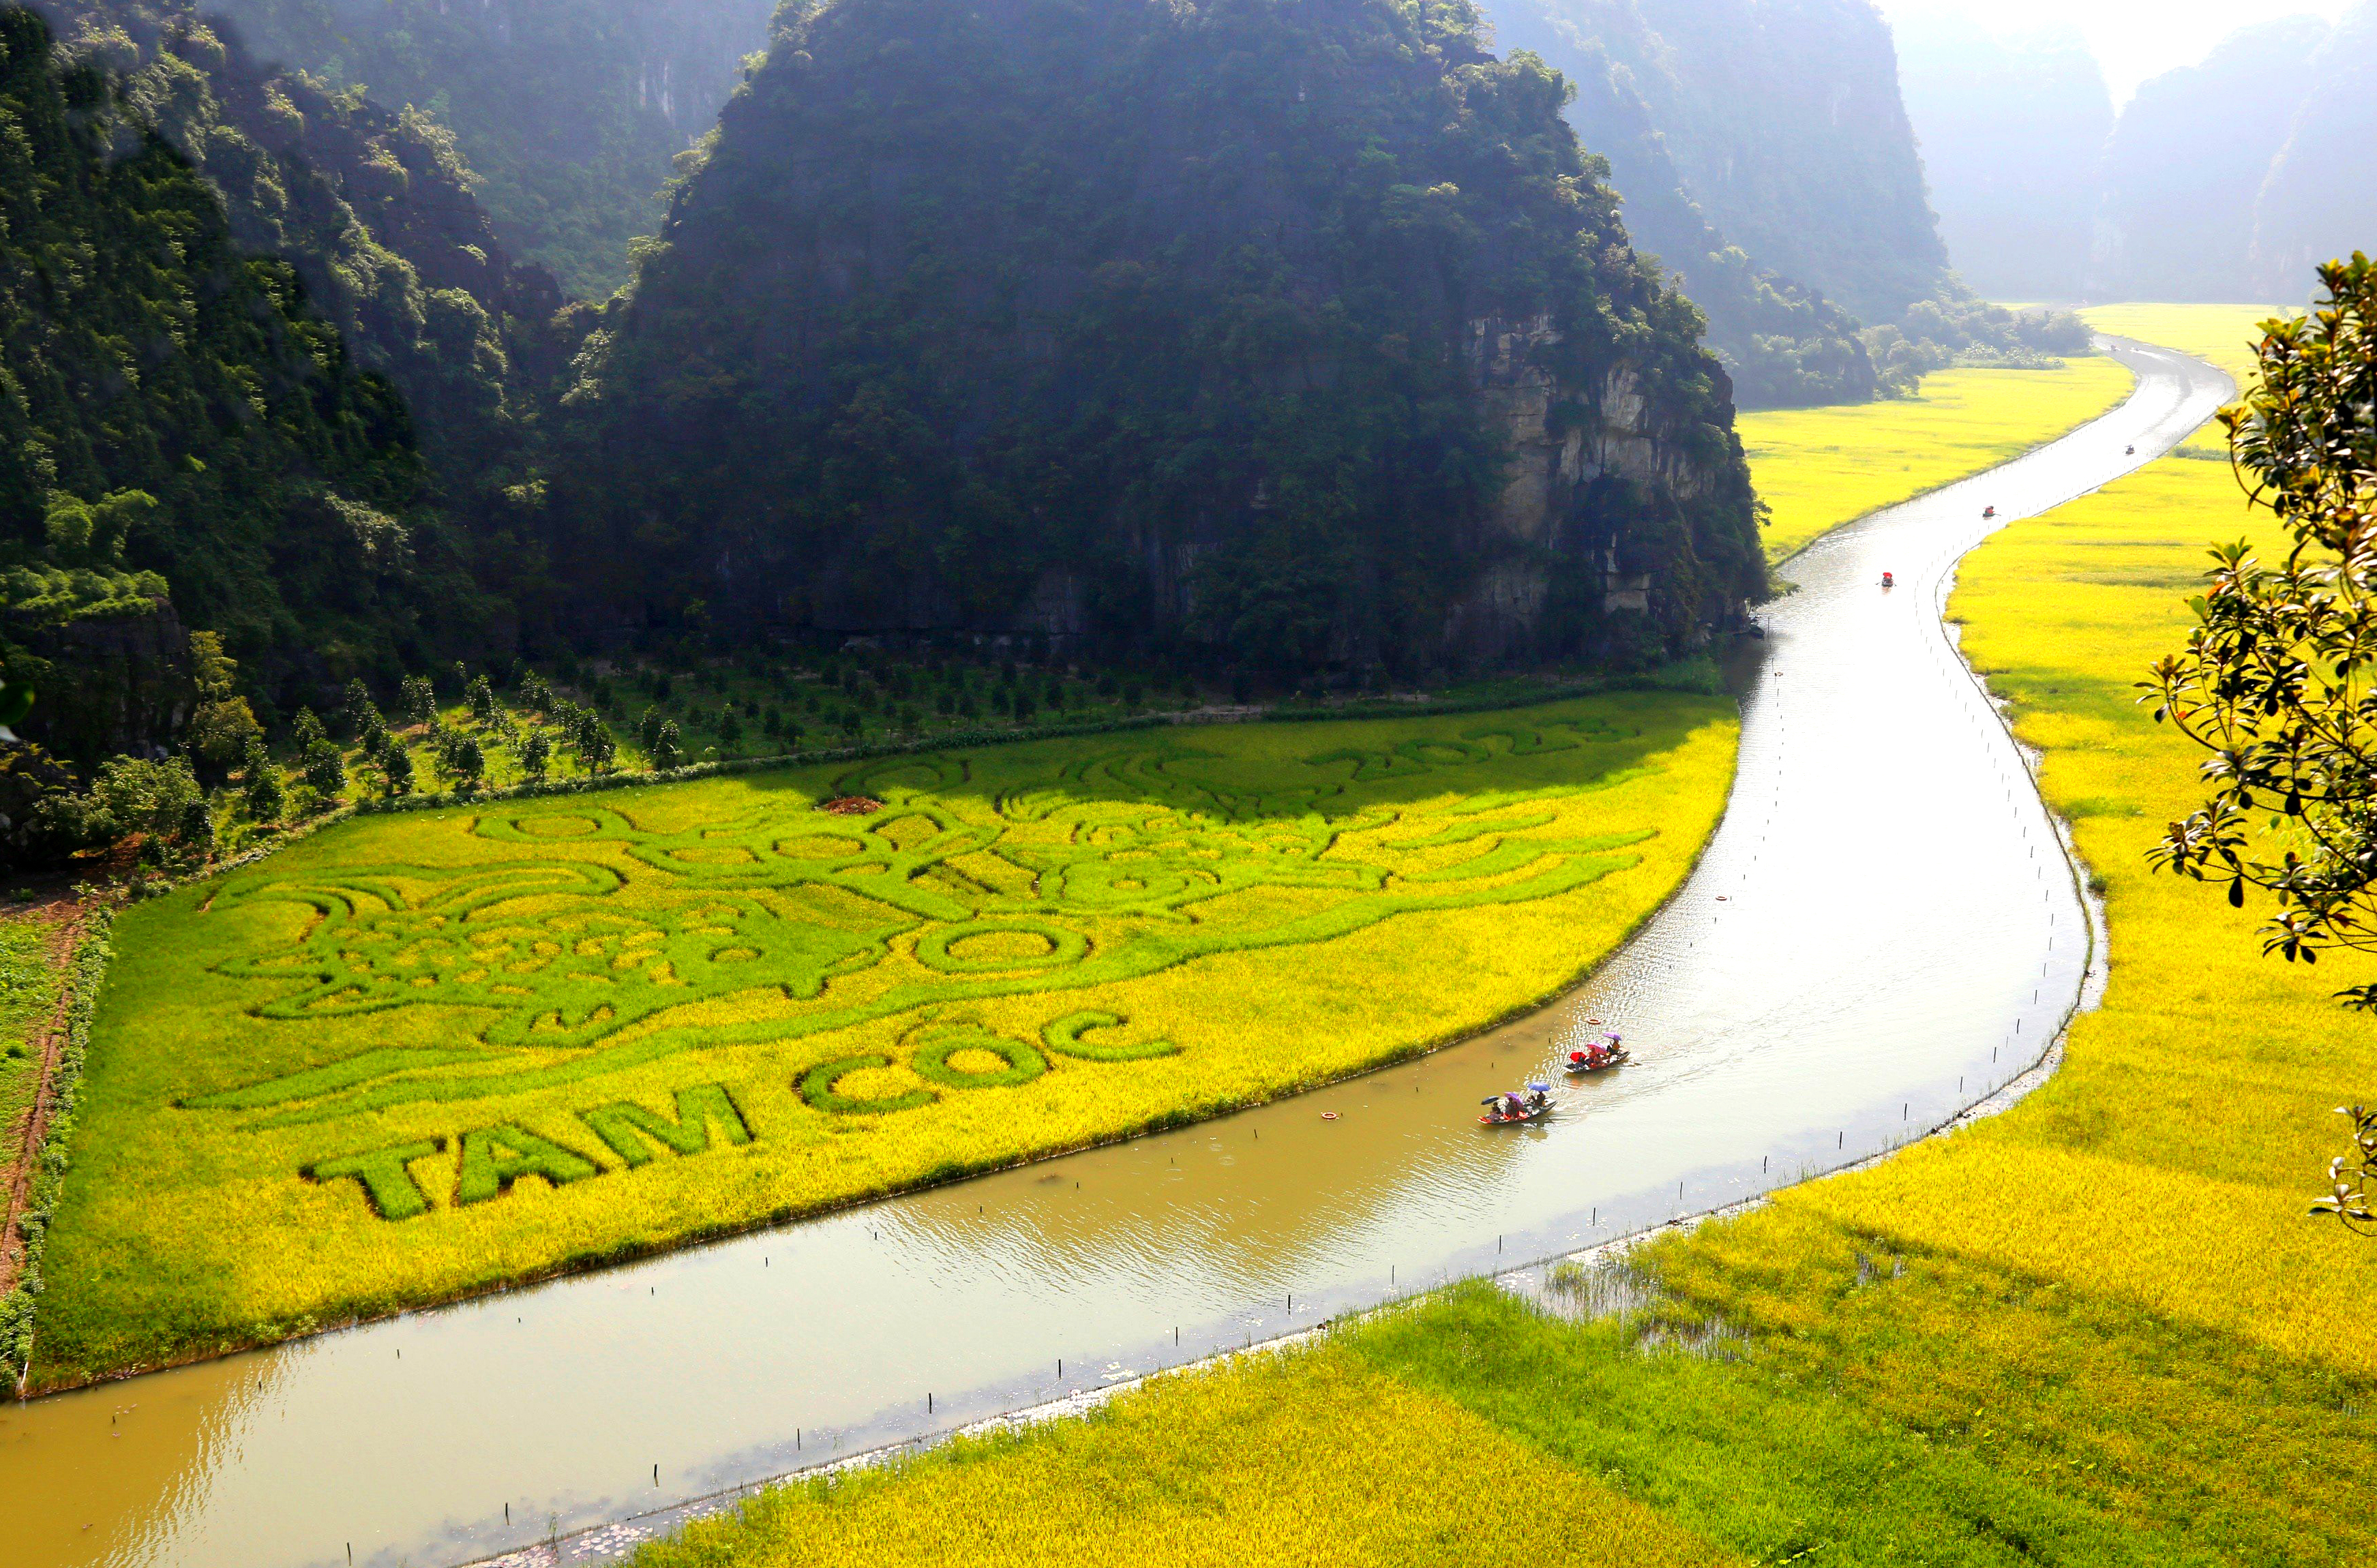 The Ninh Binh Tourism Week 2023, themed The Golden Tam Coc - Trang An, is taken place throughout the province from May 27 to June 4 in the Tam Coc - Bich Dong tourism area